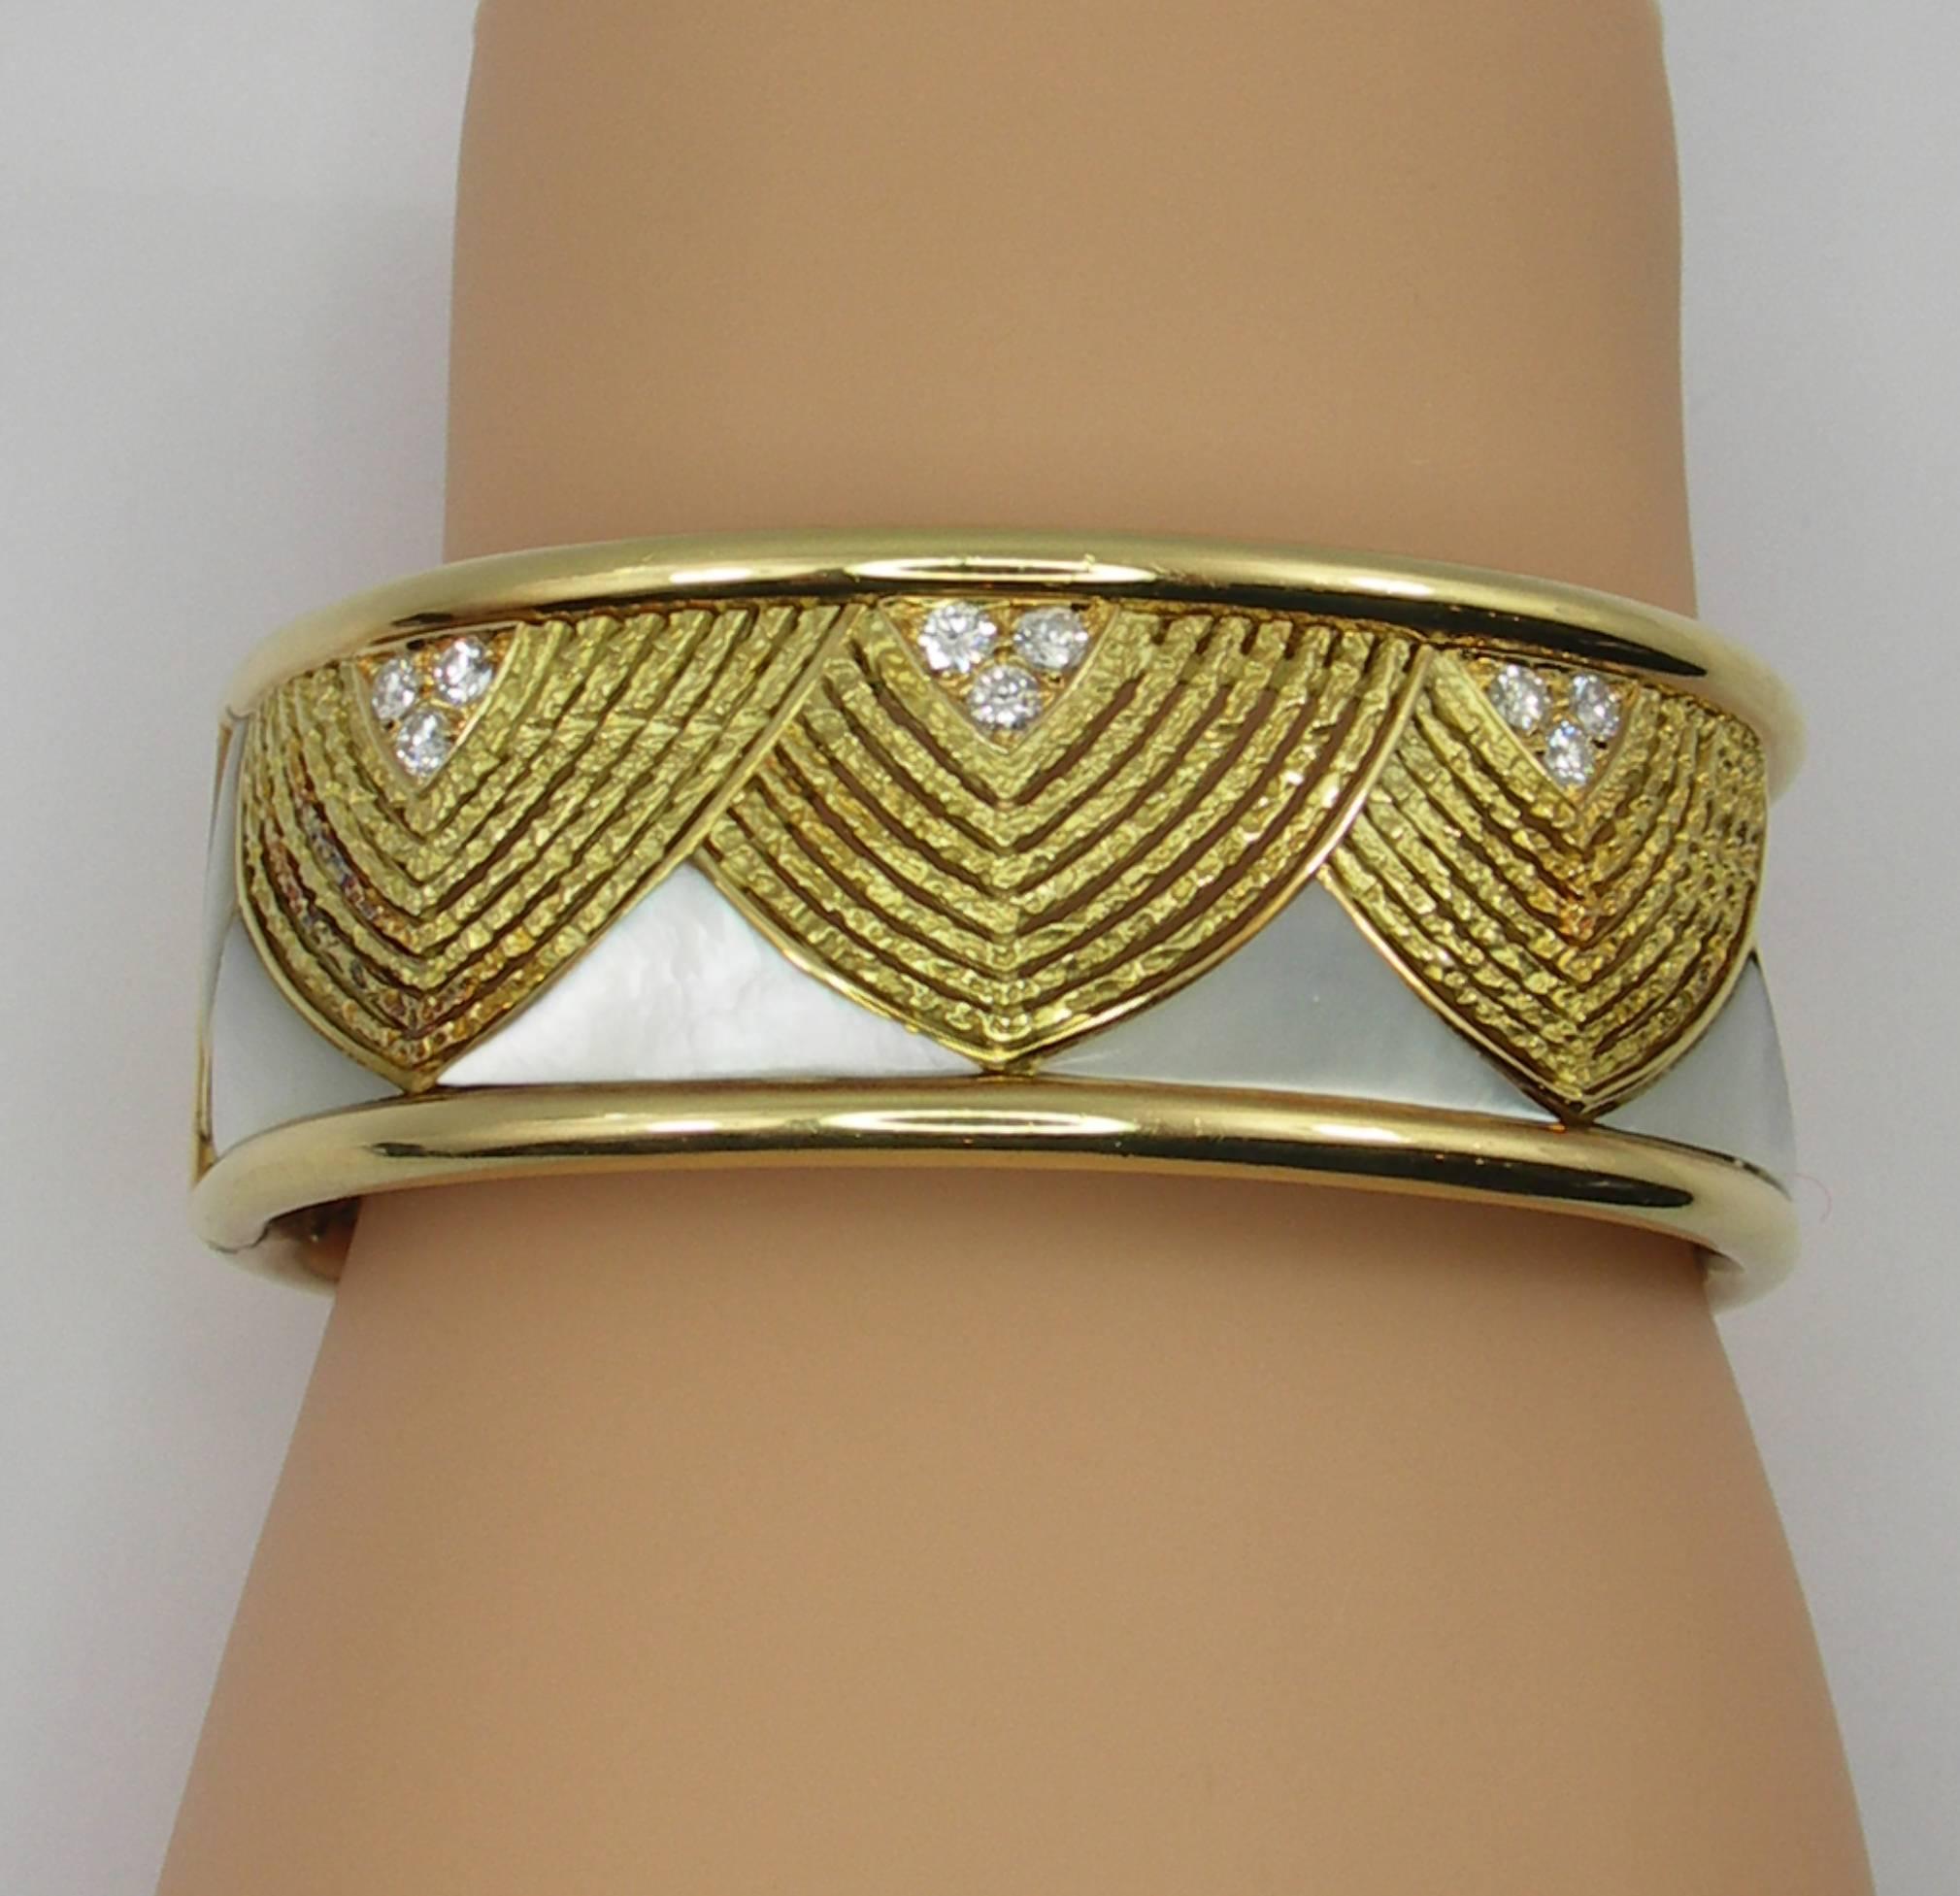 A ladies 18K yellow gold bracelet originally retailed by Neiman Marcus. Measuring 7/8 of an inch wide, it has a swagged design of filigree gold, contrasting with the mother of pearl. There are also 9 round brilliant cut diamonds weighing 1ct total